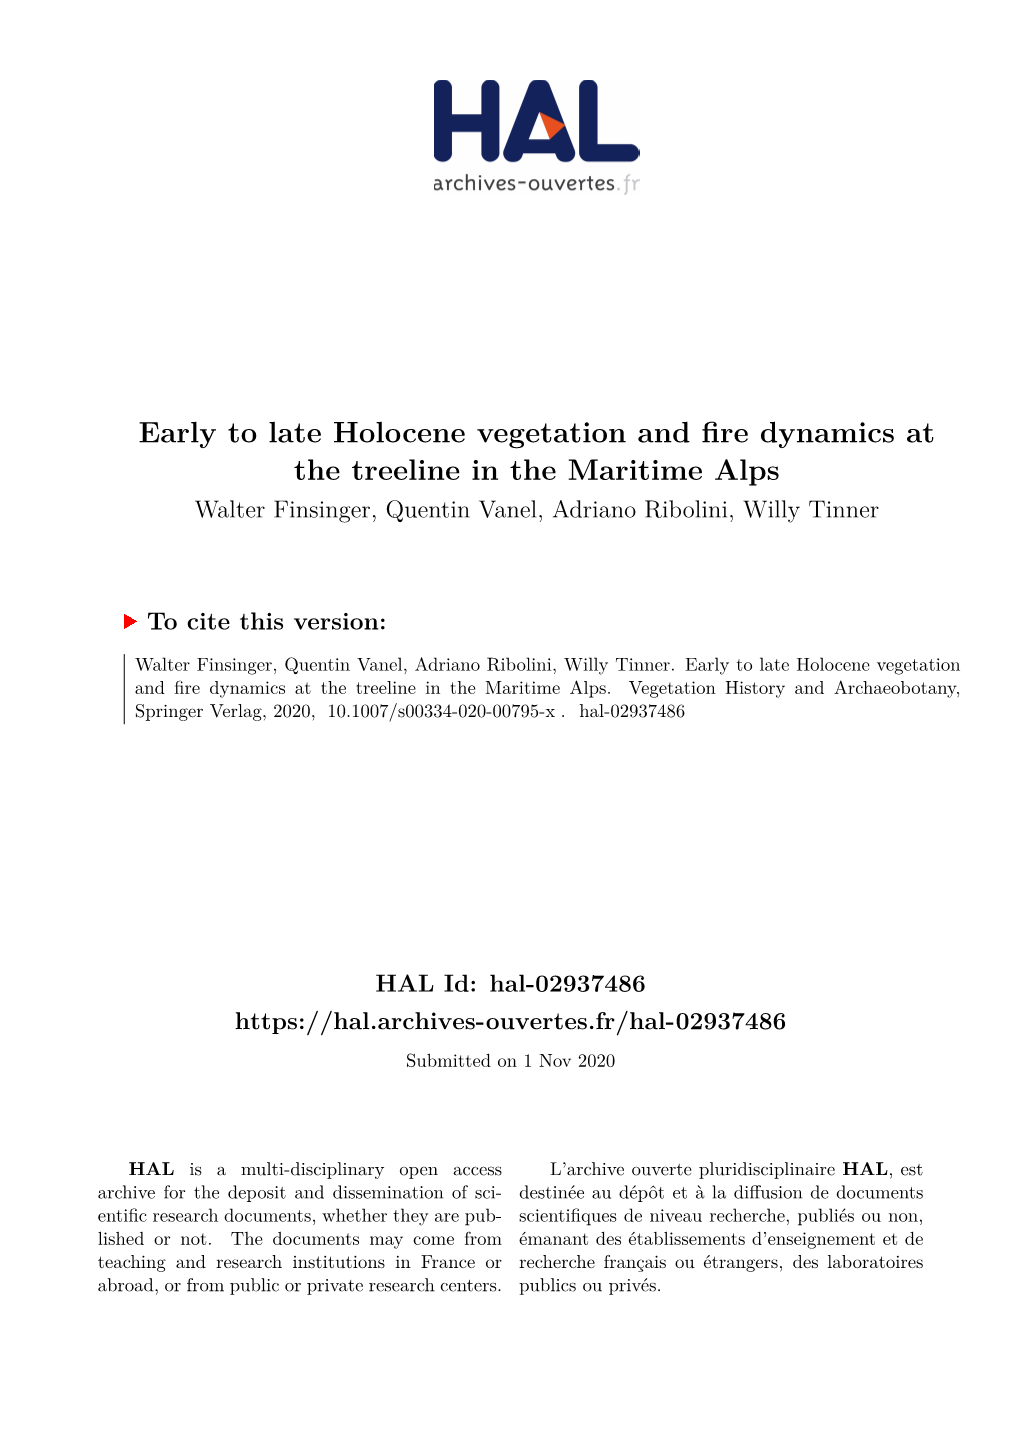 Early to Late Holocene Vegetation and Fire Dynamics at the Treeline in the Maritime Alps Walter Finsinger, Quentin Vanel, Adriano Ribolini, Willy Tinner